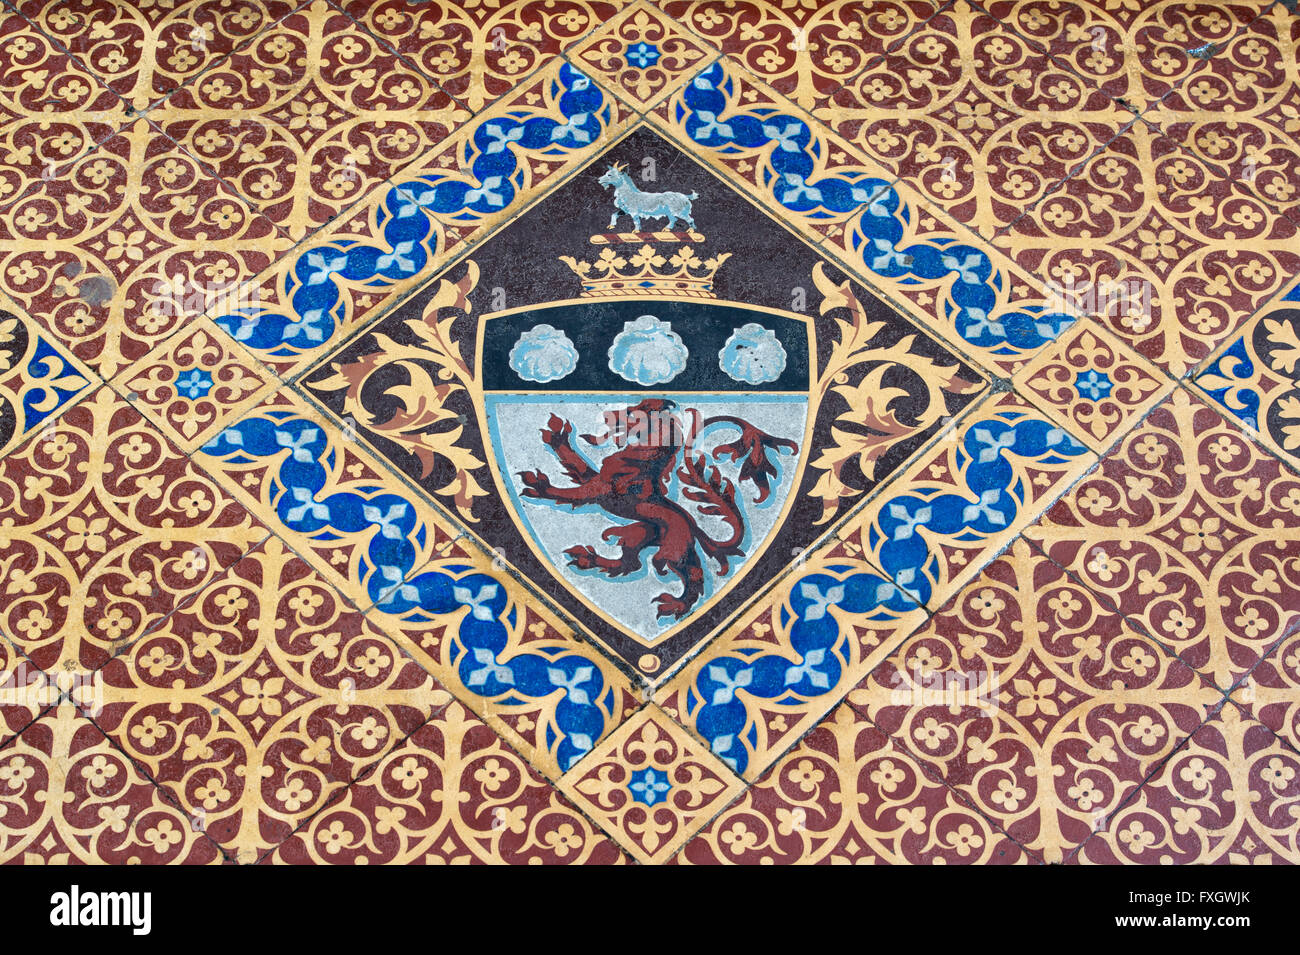 Ely cathedral decorative tiled floor in the presbytery. Ely, Cambridgeshire, England Stock Photo